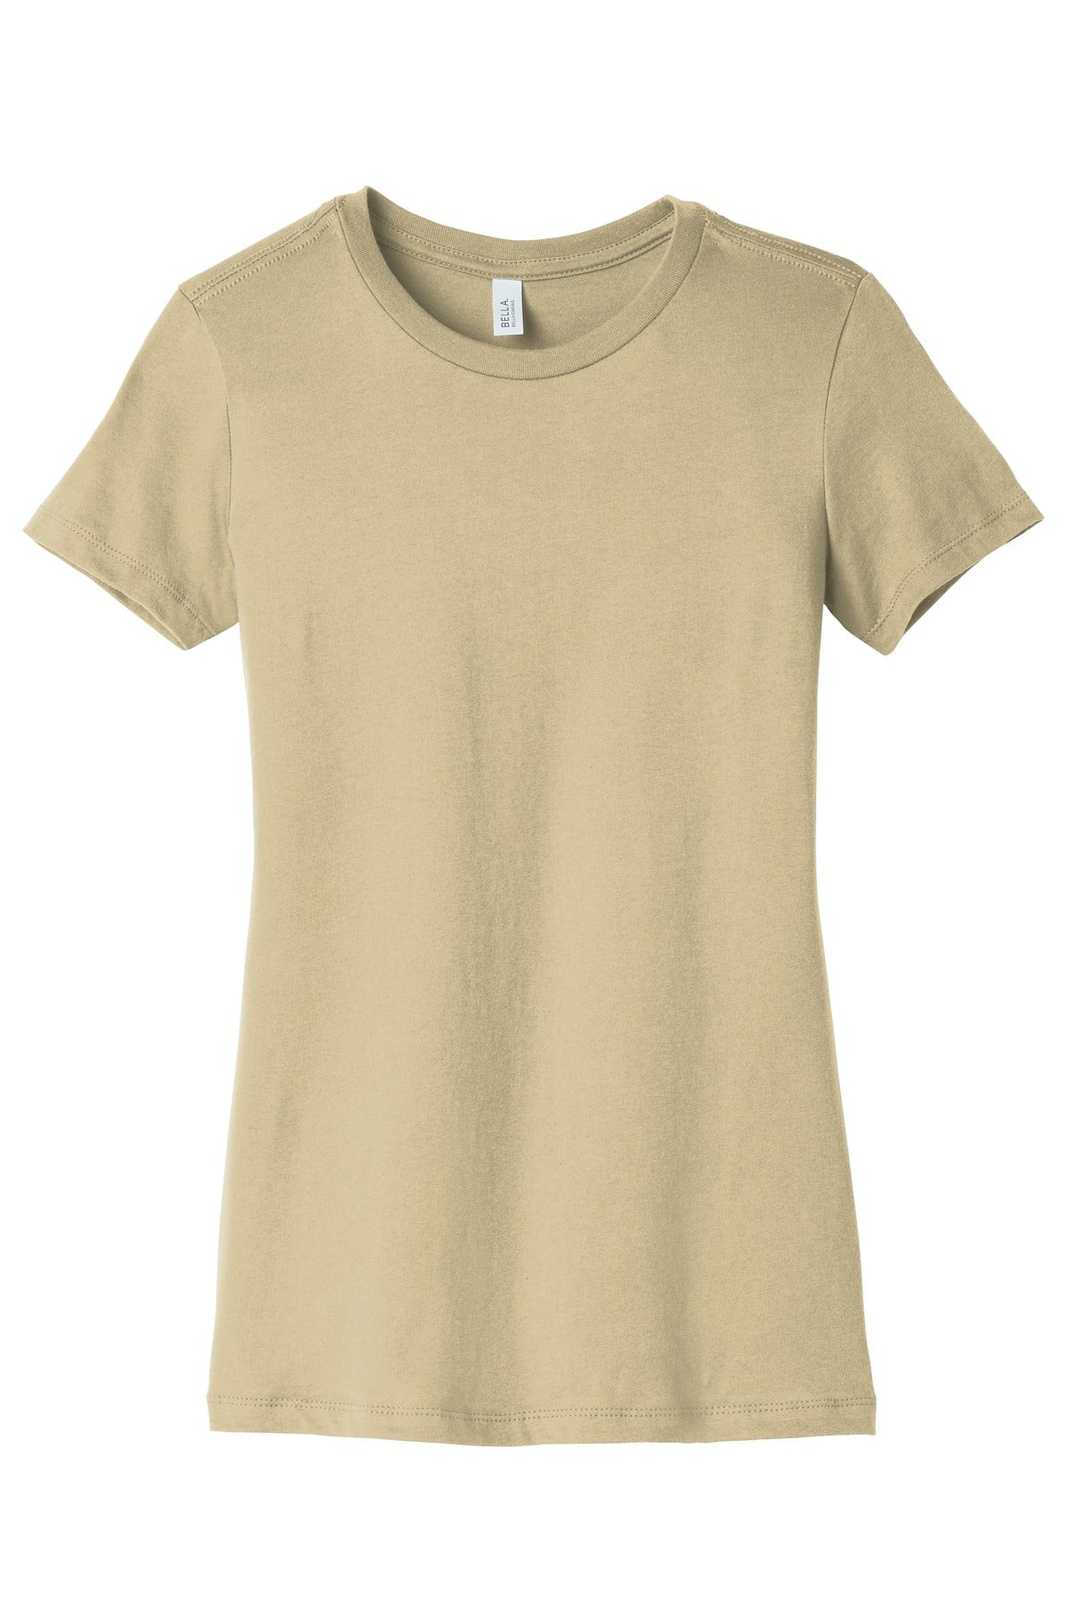 Bella + Canvas 6004 Women's The Favorite Tee - Soft Cream - HIT a Double